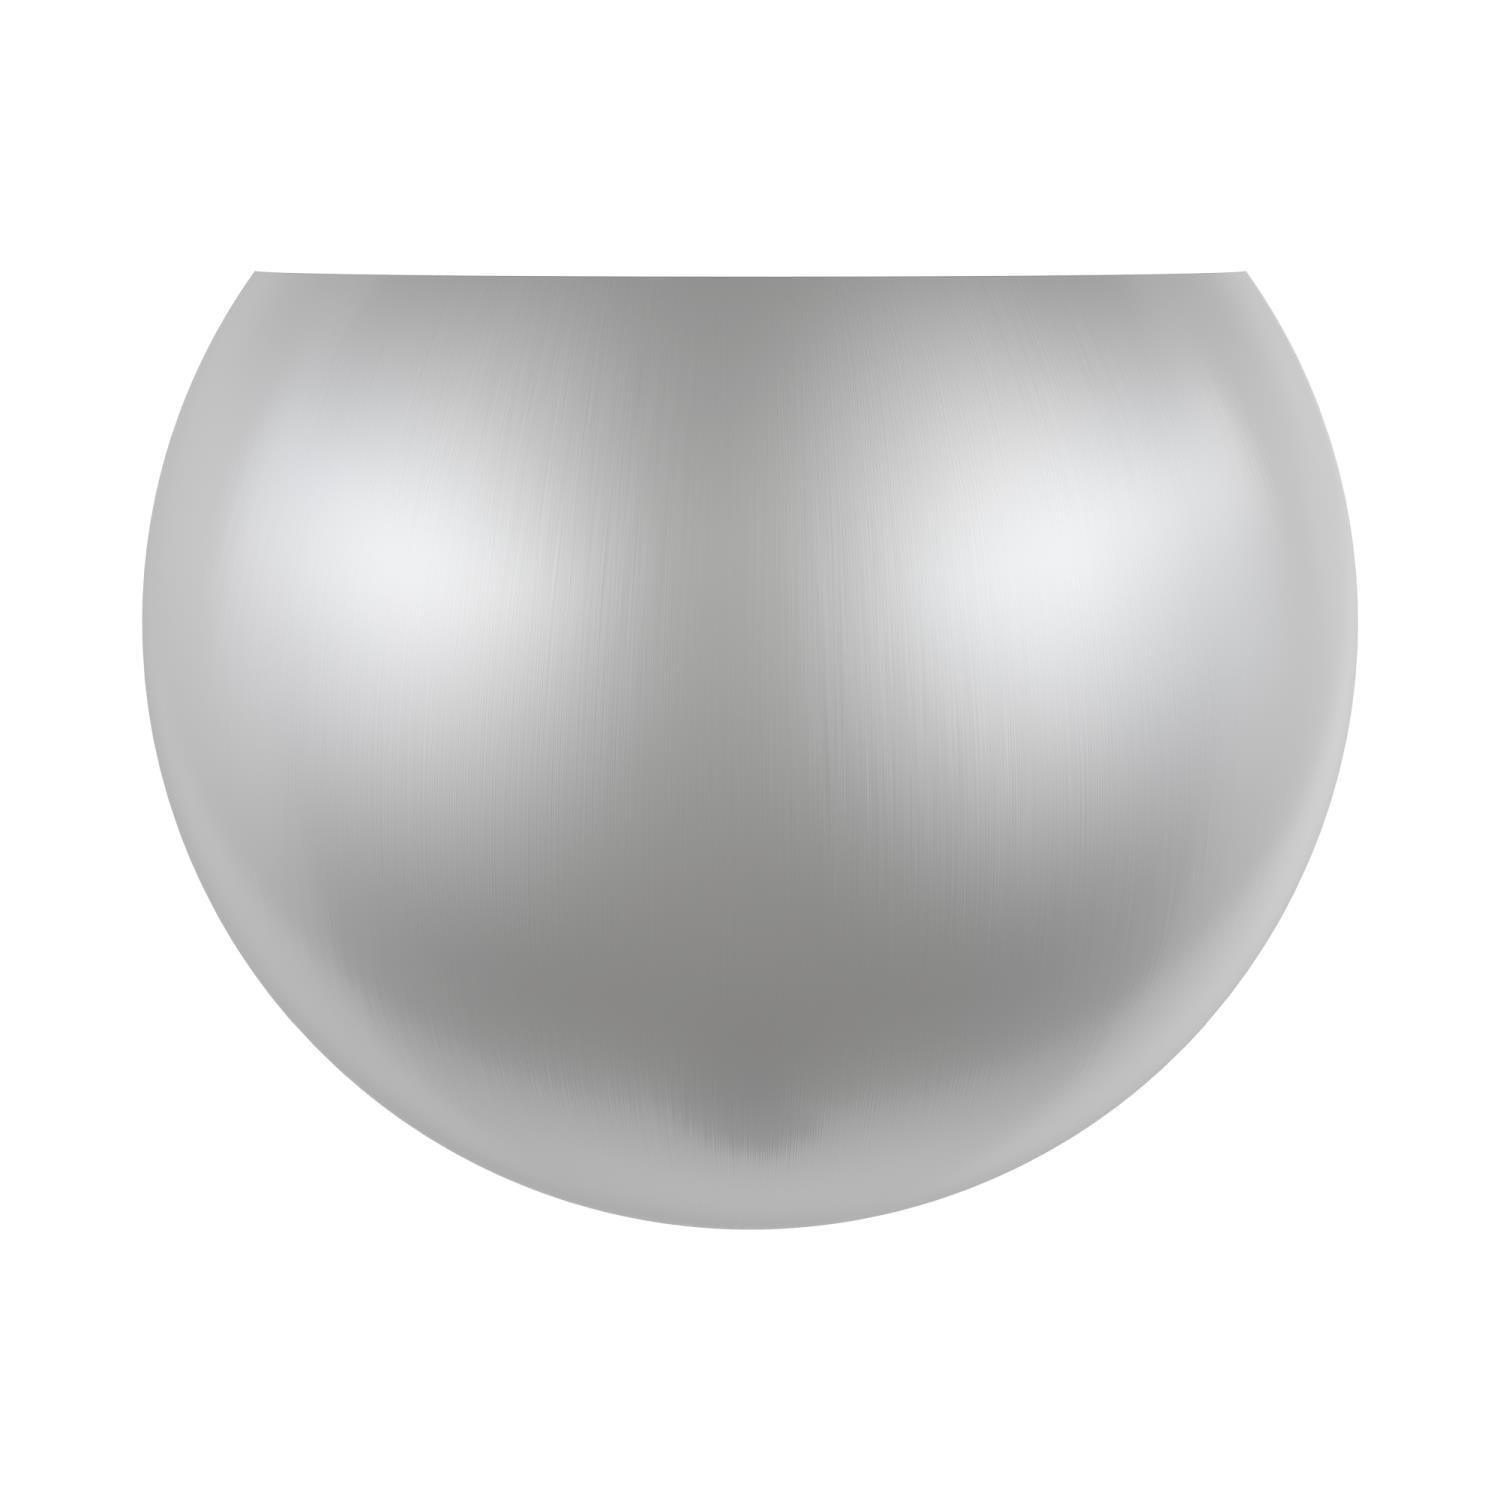 Piedmont Contemporary Half Moon Wall Sconce in Brushed Nickel